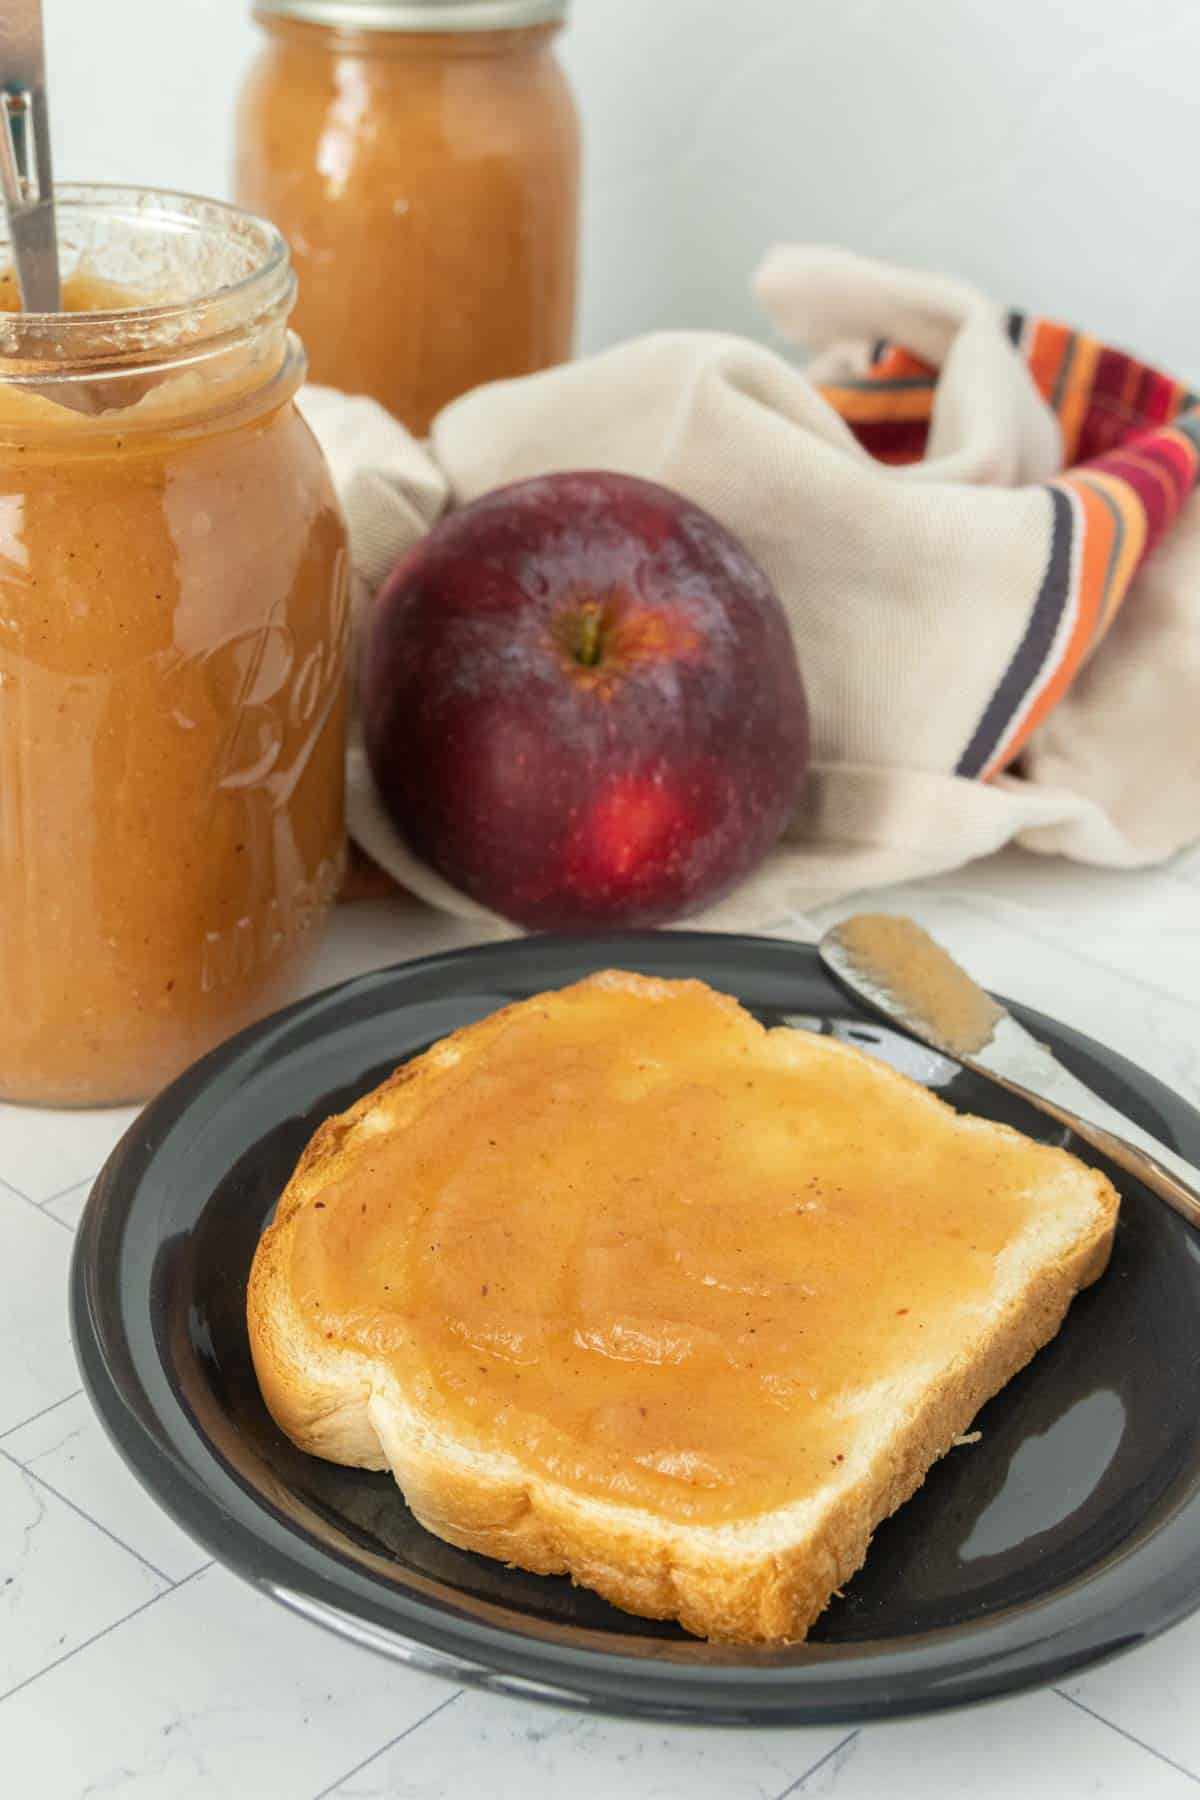 Apple butter on a plate next to a slice of bread.